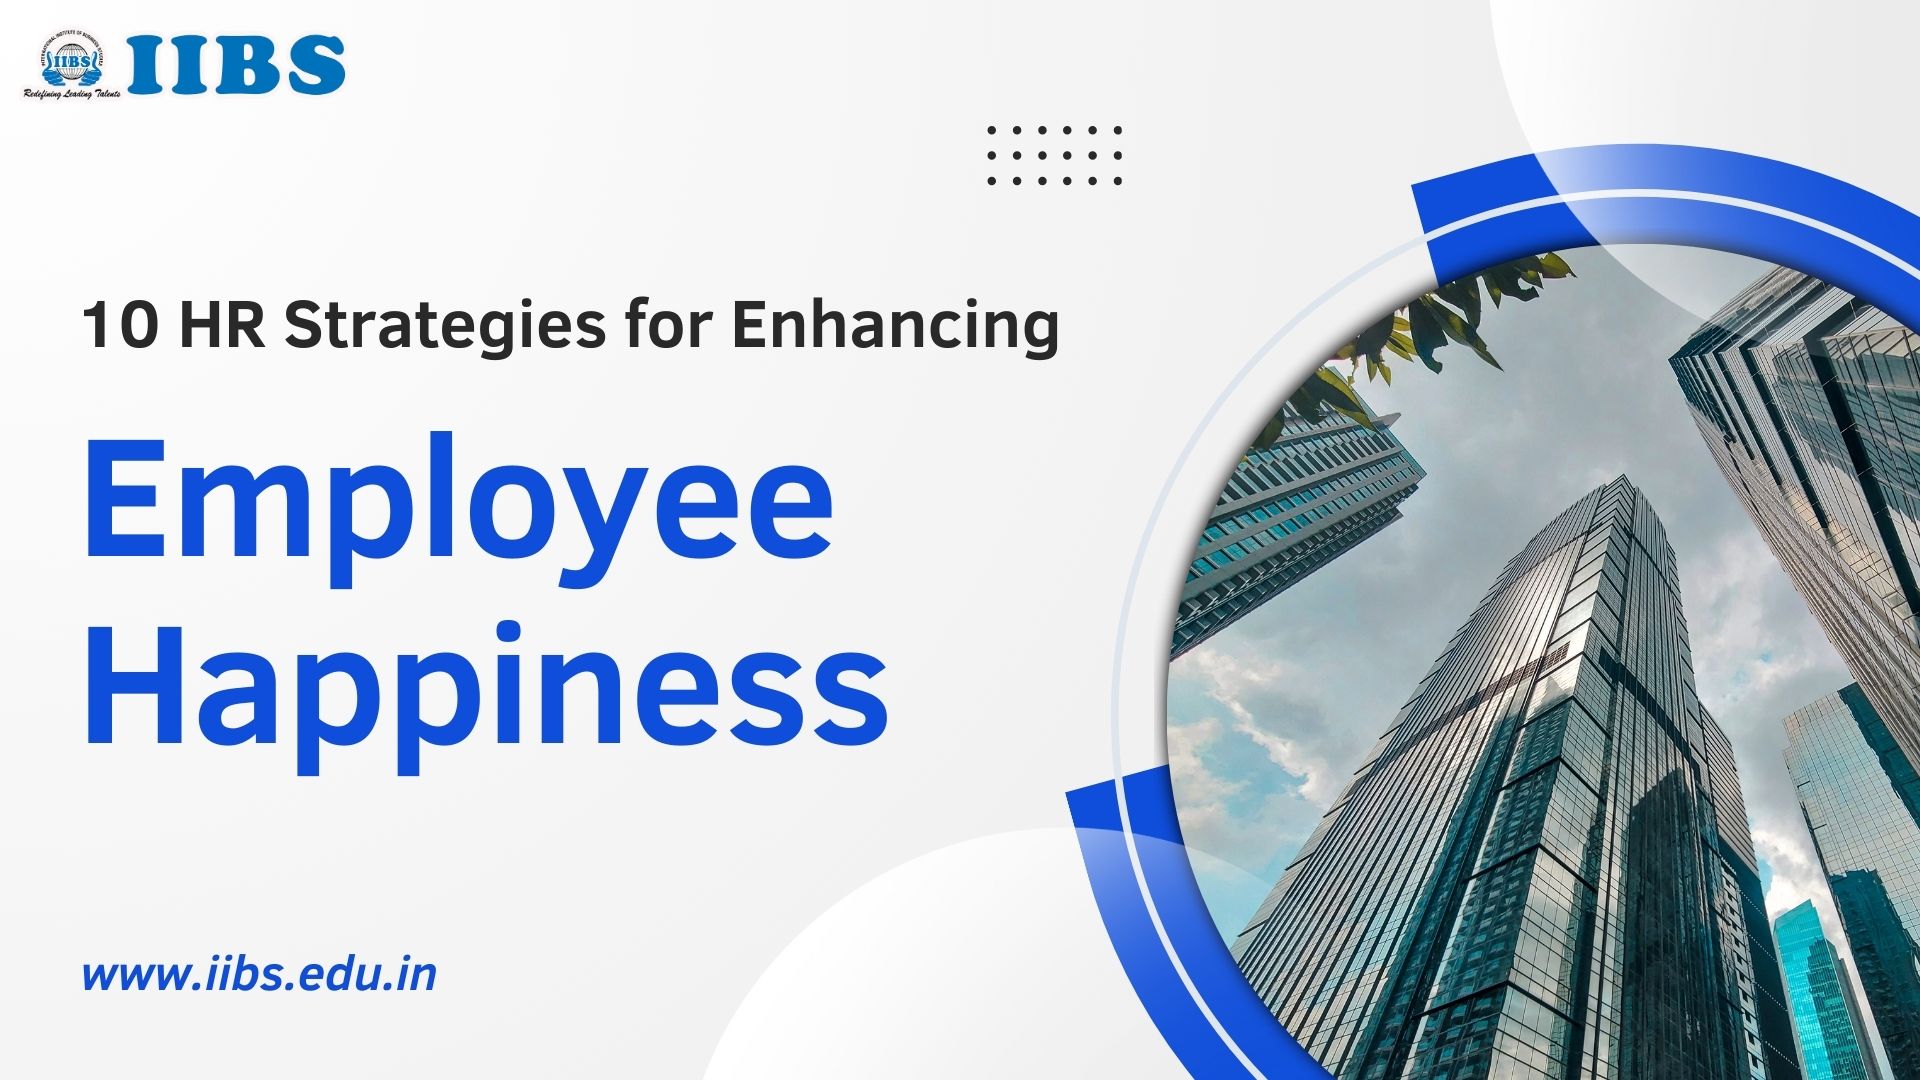 10 HR Strategies for Enhancing Employee Happiness